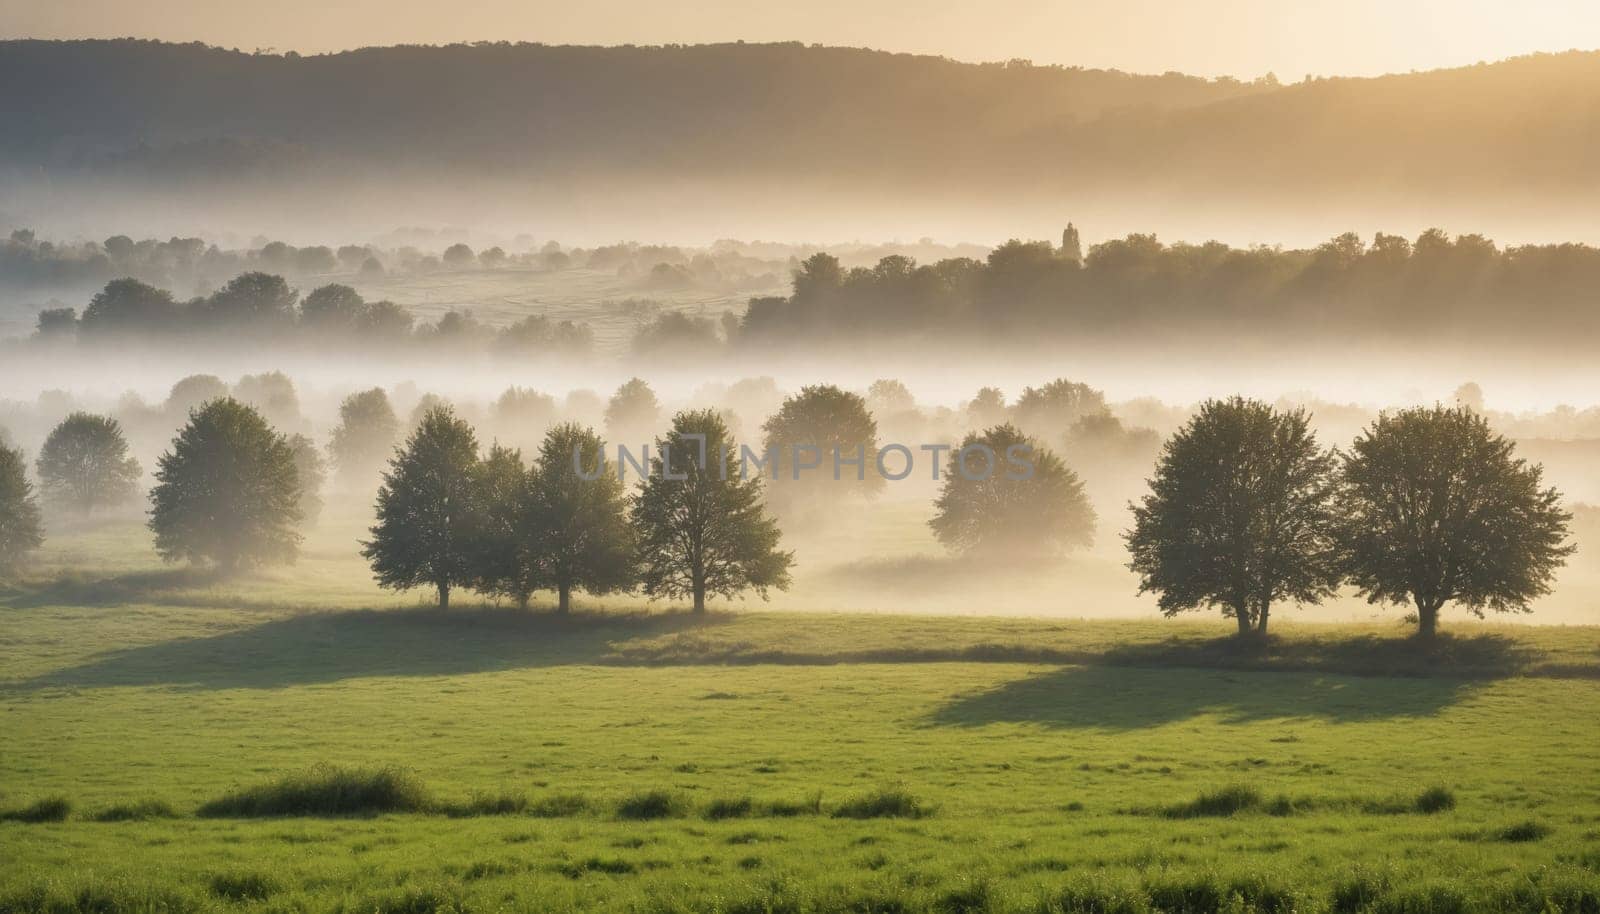 The sun rises over a tranquil valley, casting warm light on the dense fog that swirls through the trees and blankets the verdant meadow. The gentle breeze carries the scent of fresh grass and dew, creating an atmosphere of peace and quietude.